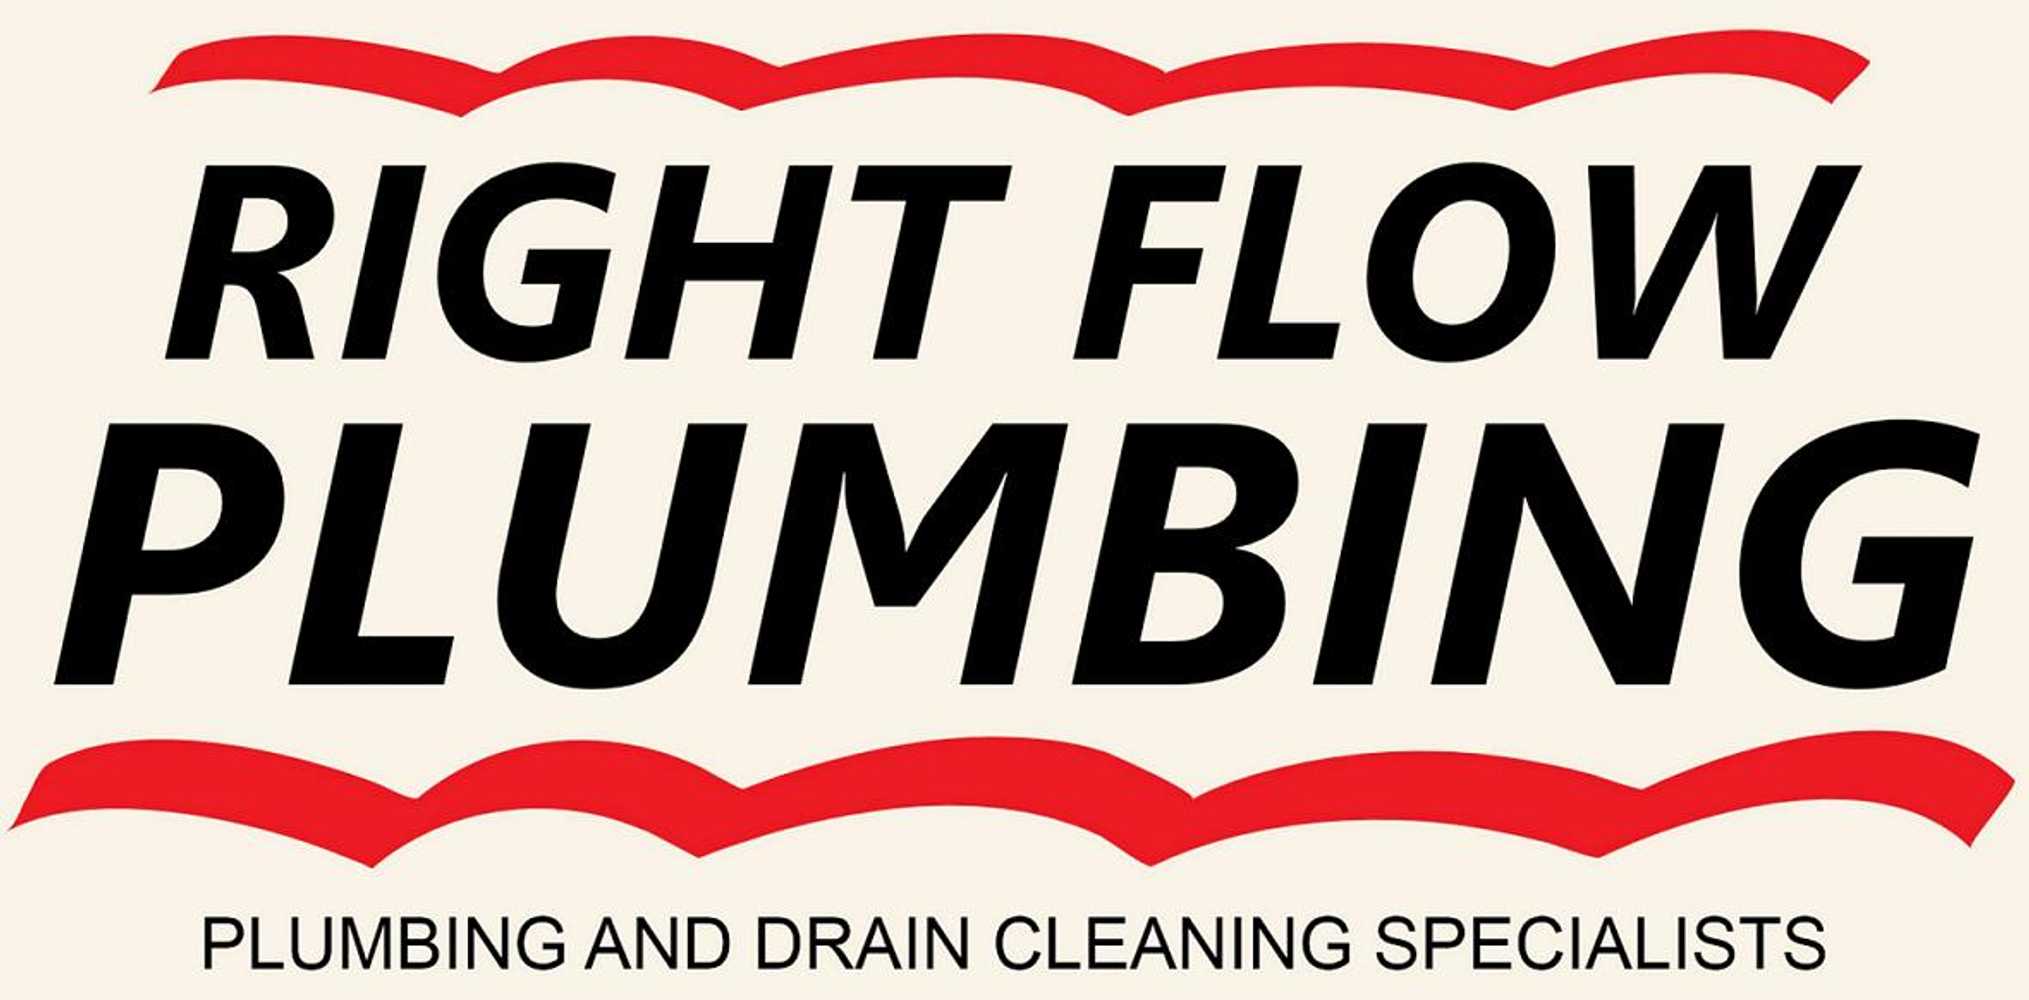 Project photos from Right Flow Plumbing